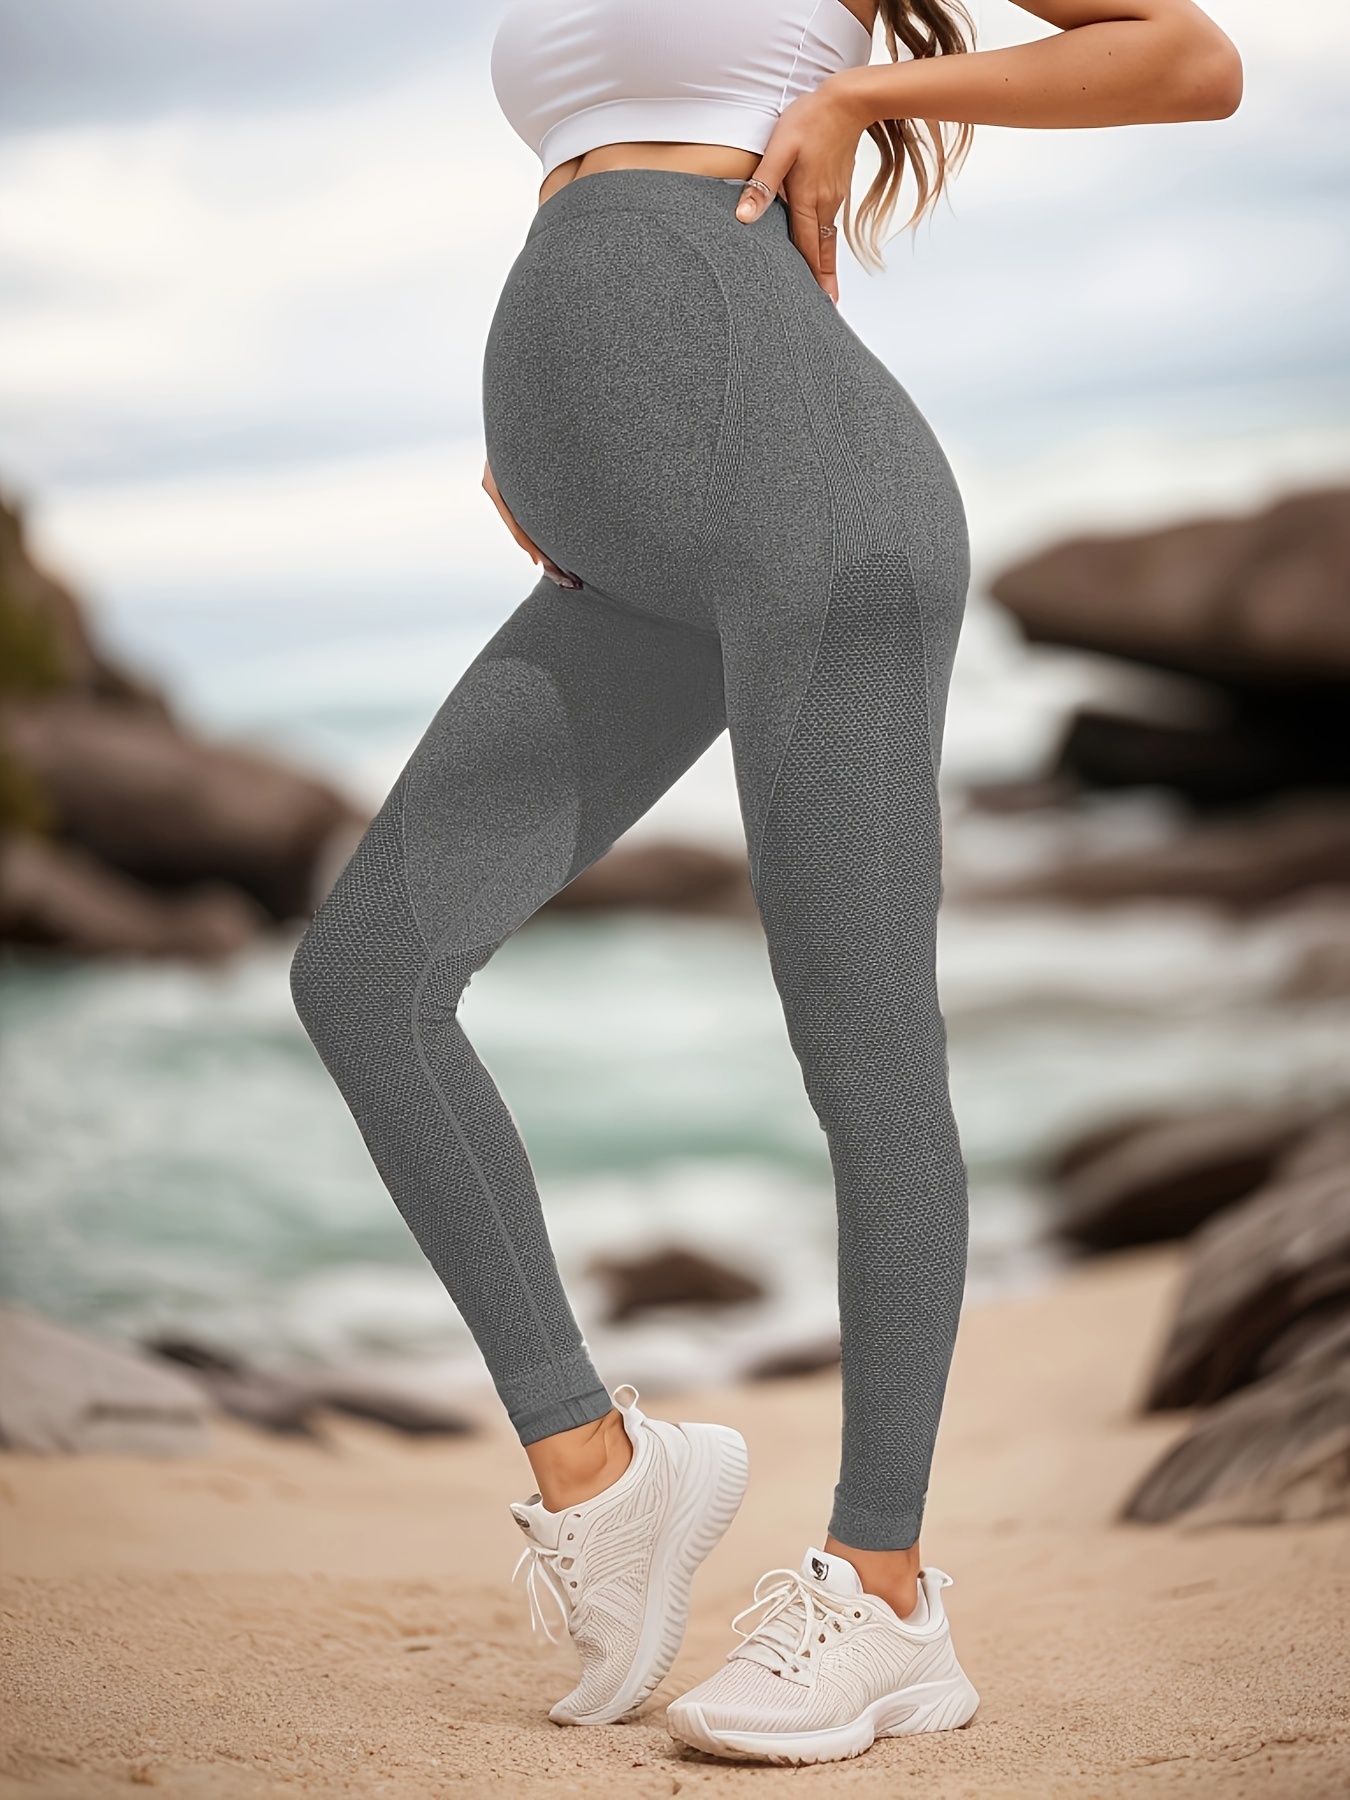 Thick Cotton Thick Maternity Leggings For Women Slim Fit, Ankle Length,  Lable, High Elastic Perfect For Fall Fitness And Casual Wear Available In  Plus Sizes 211215 From Luo02, $11.39